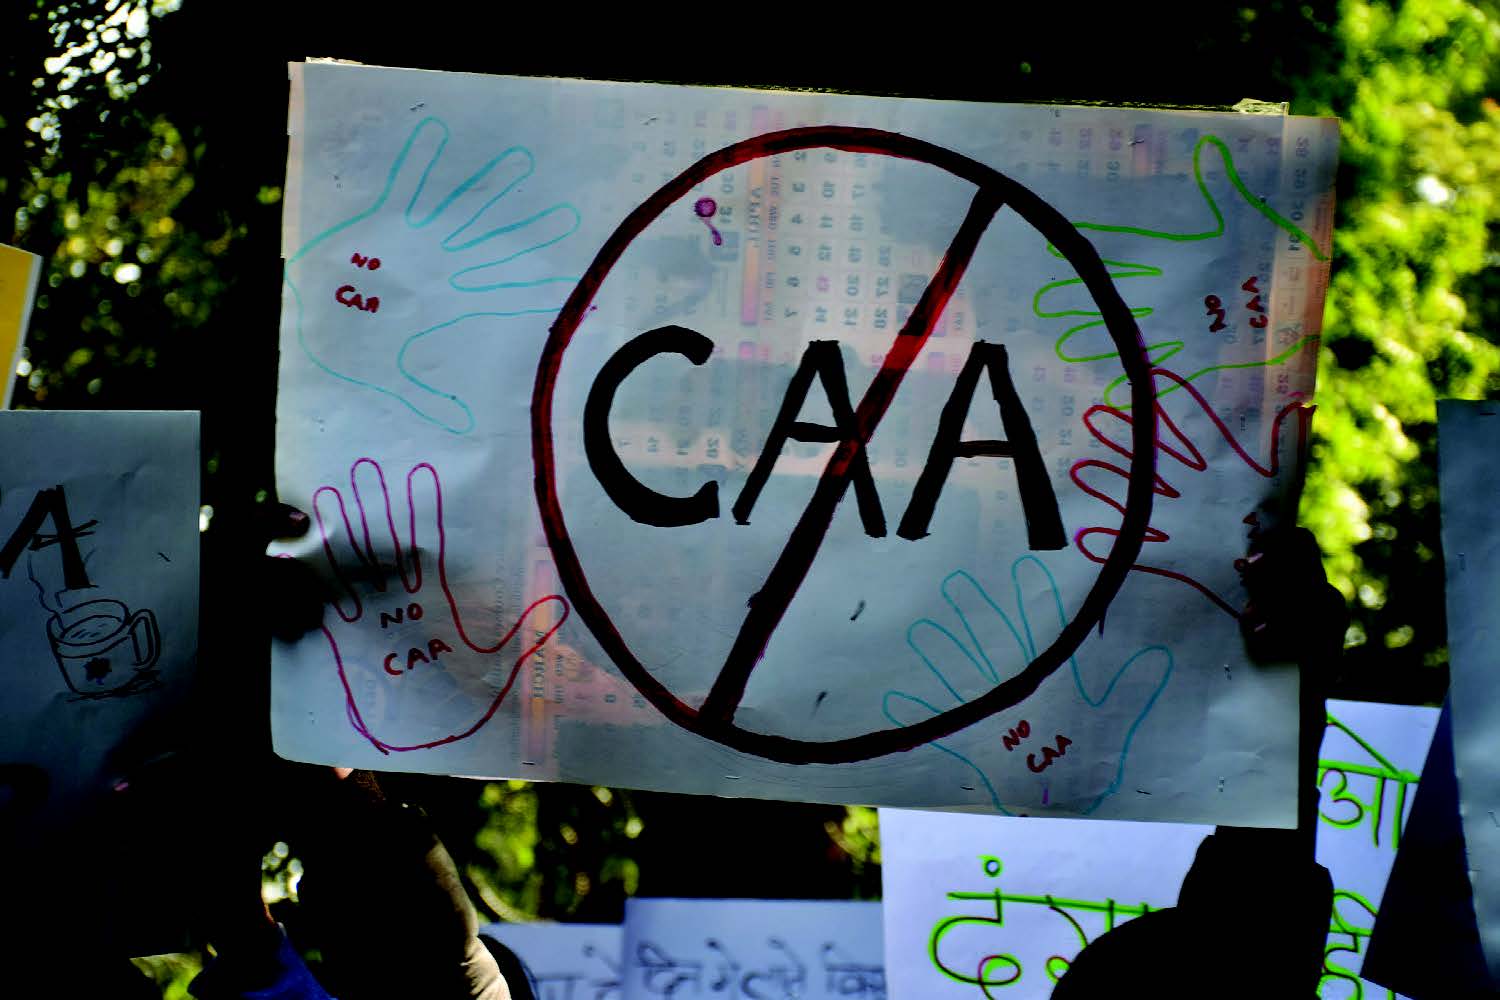 A figure holds up a sign that says "CAA" but crossed-out.